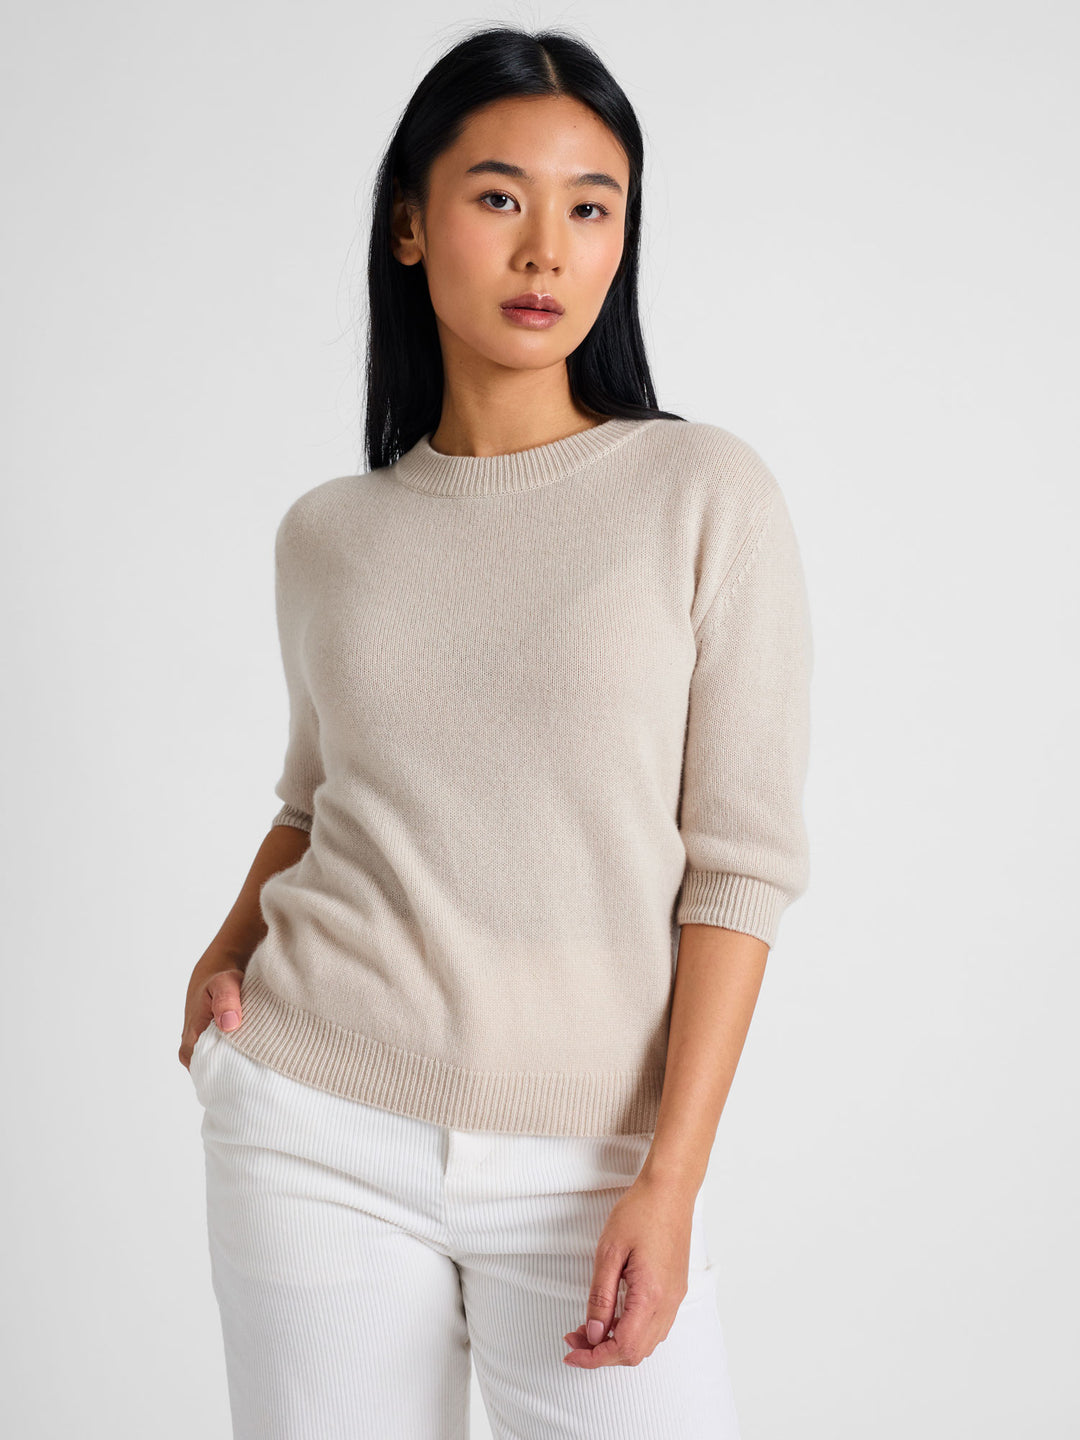 Short sleeved cashmere sweater "Aase" in 100% pure cashmere. Scandinavian design by Kashmina. Color: Cream.